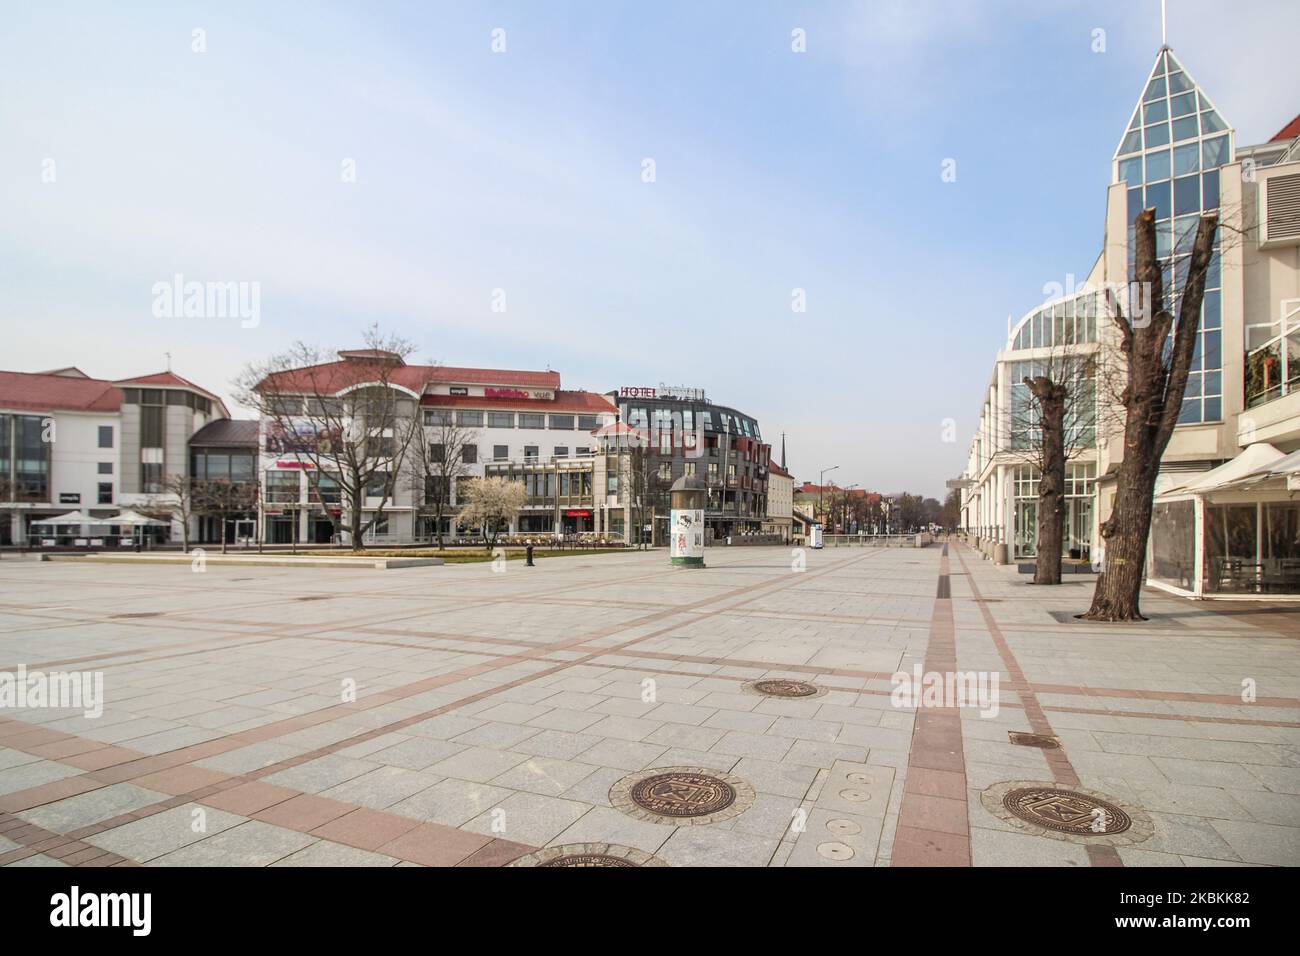 Completely empty Plac Zdrojowy, normally full of people, in front of Grand Hotel is seen in Sopot, Poland on 27 March 2020 Polish government due the Covid-19 danger, forced ban on gatherings of more than 2 people and a ban on leaving home without apparent reason, as for instance going to job, to the pharmacy or for a dog walking. (Photo by Michal Fludra/NurPhoto) Stock Photo